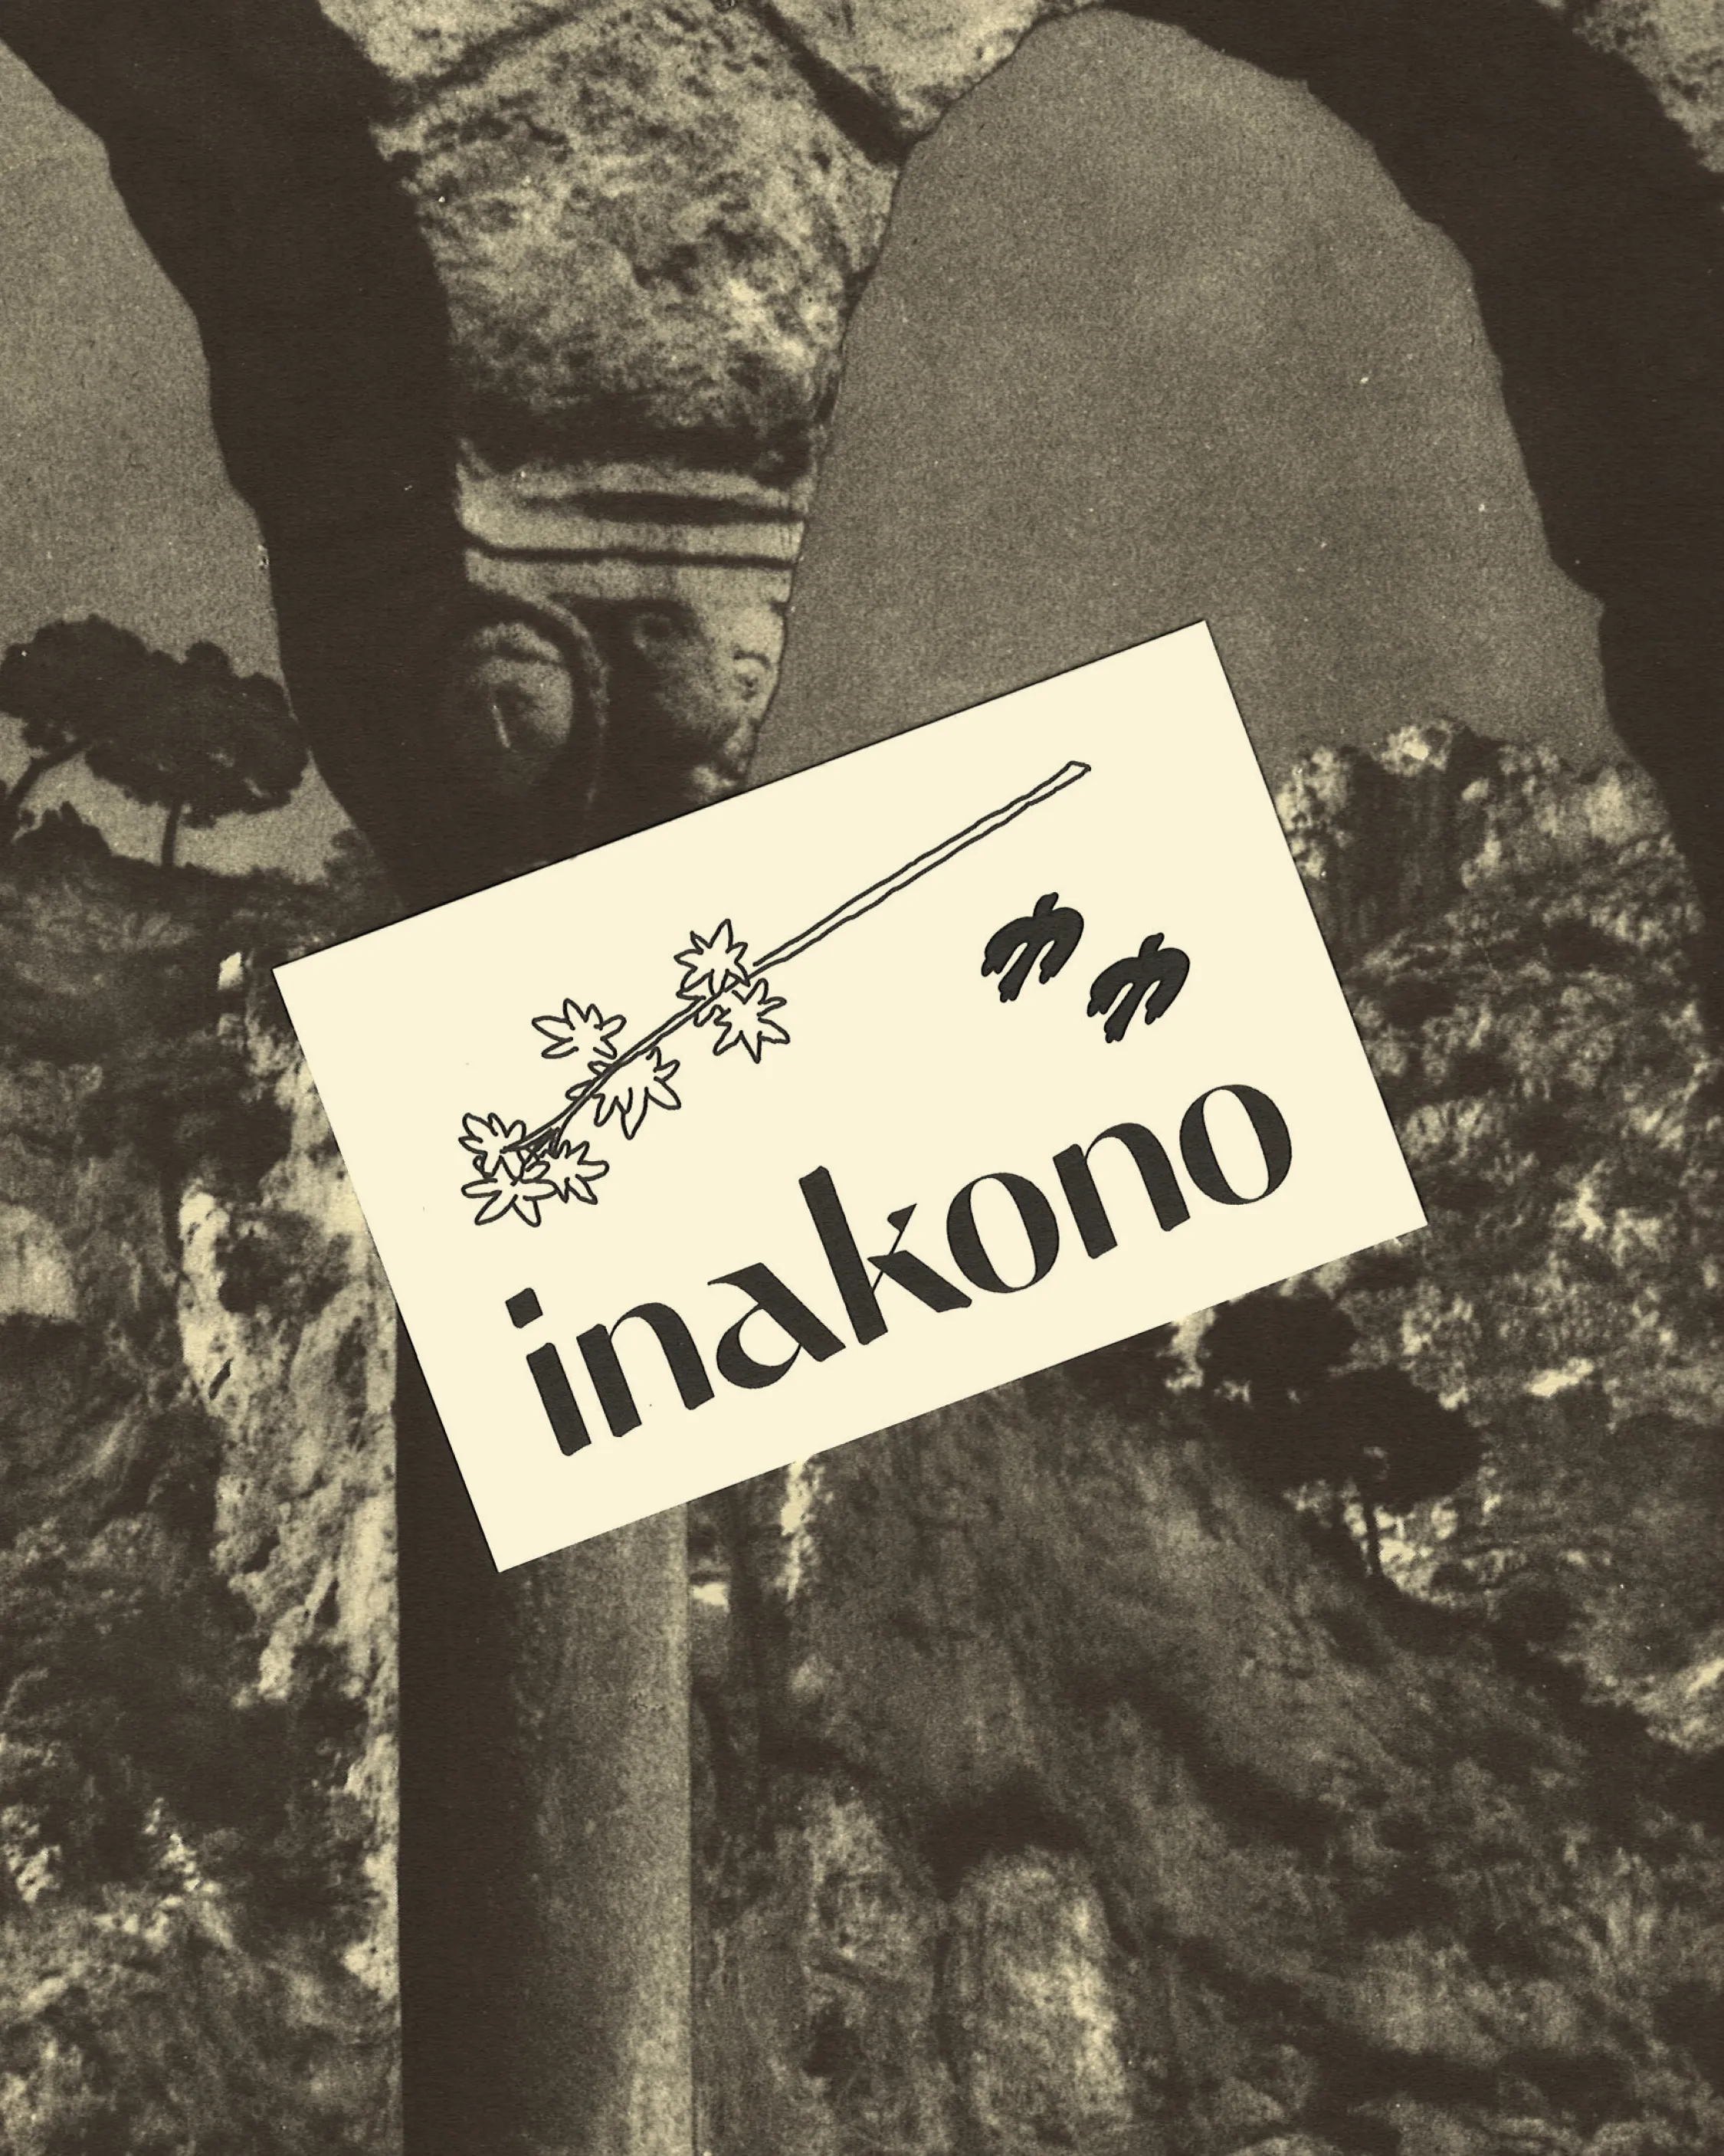 Inakono's business card layered on top of a vintage picture taken in the south of France